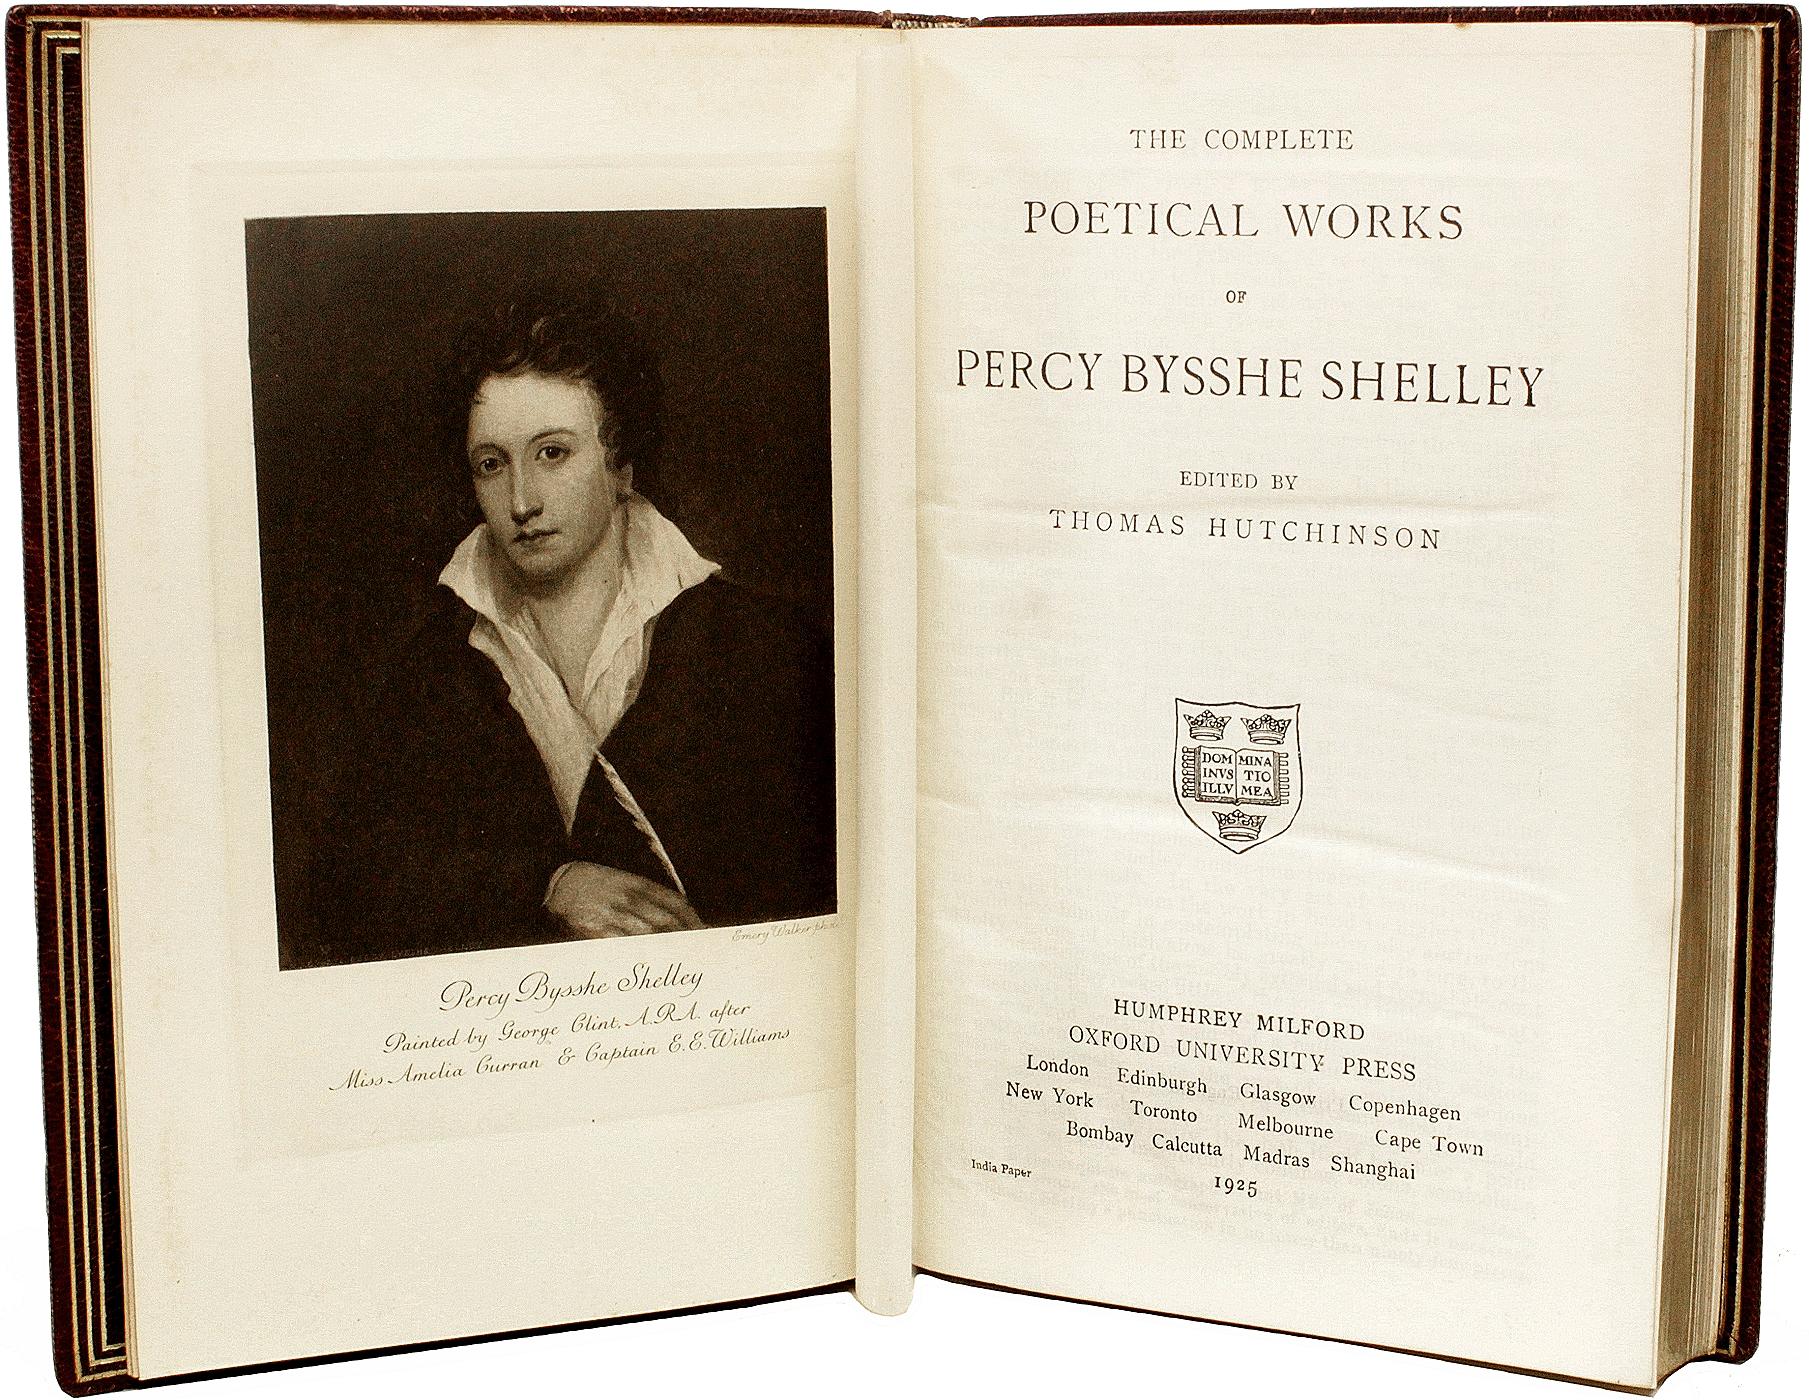 AUTHOR: SHELLEY, Percy Bysshe. 

TITLE: The Complete Poetical Works of Percy Bysshe Shelley.

PUBLISHER: London: Oxford University Press, 1925.

DESCRIPTION: 1 vol., 912pp., 7-1/4